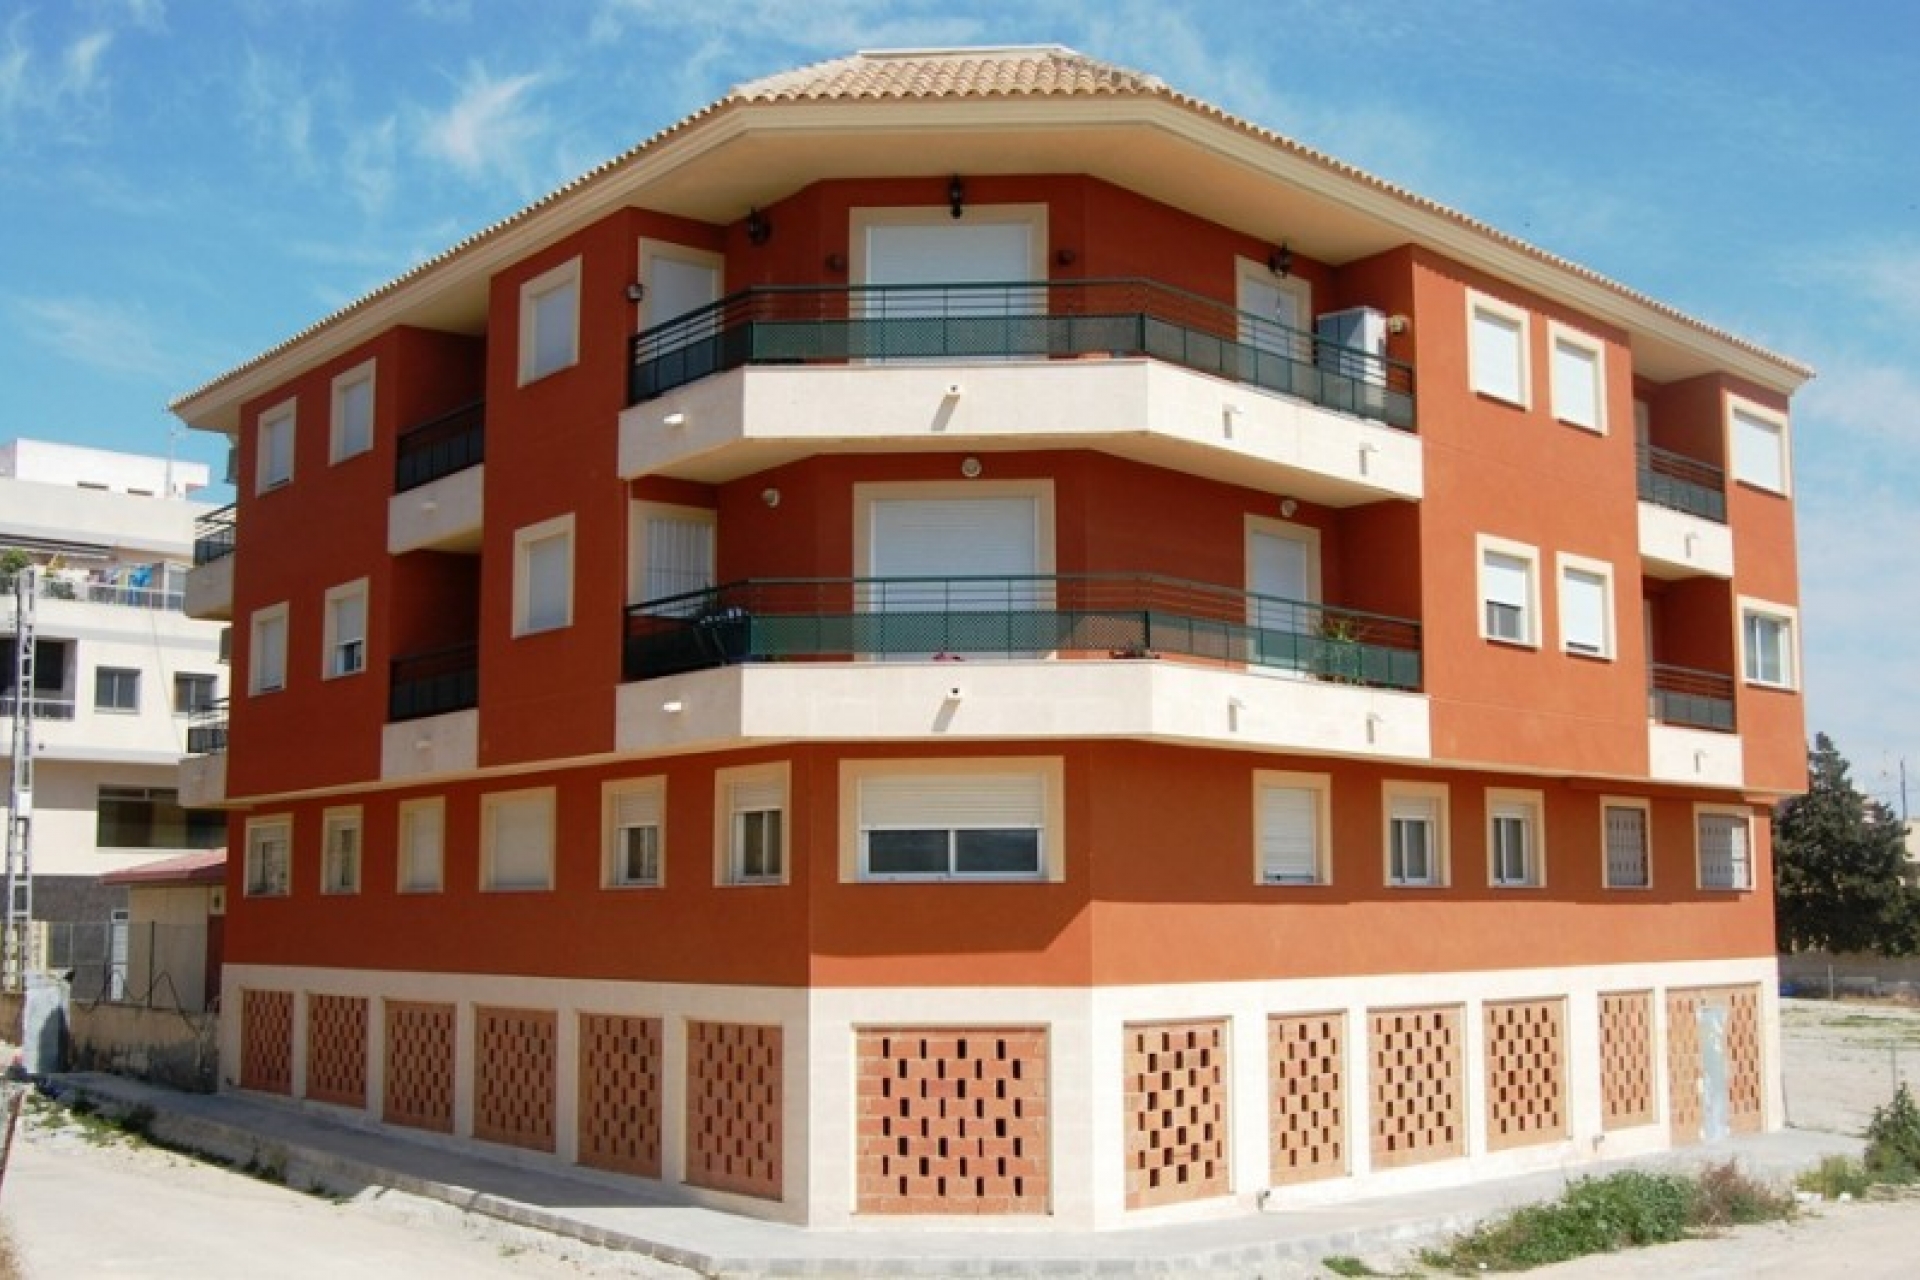 Cheap bargain new apartment for sale, cheap property in San Miguel near Los Montesinos and Torrevieja, Costa Blanca